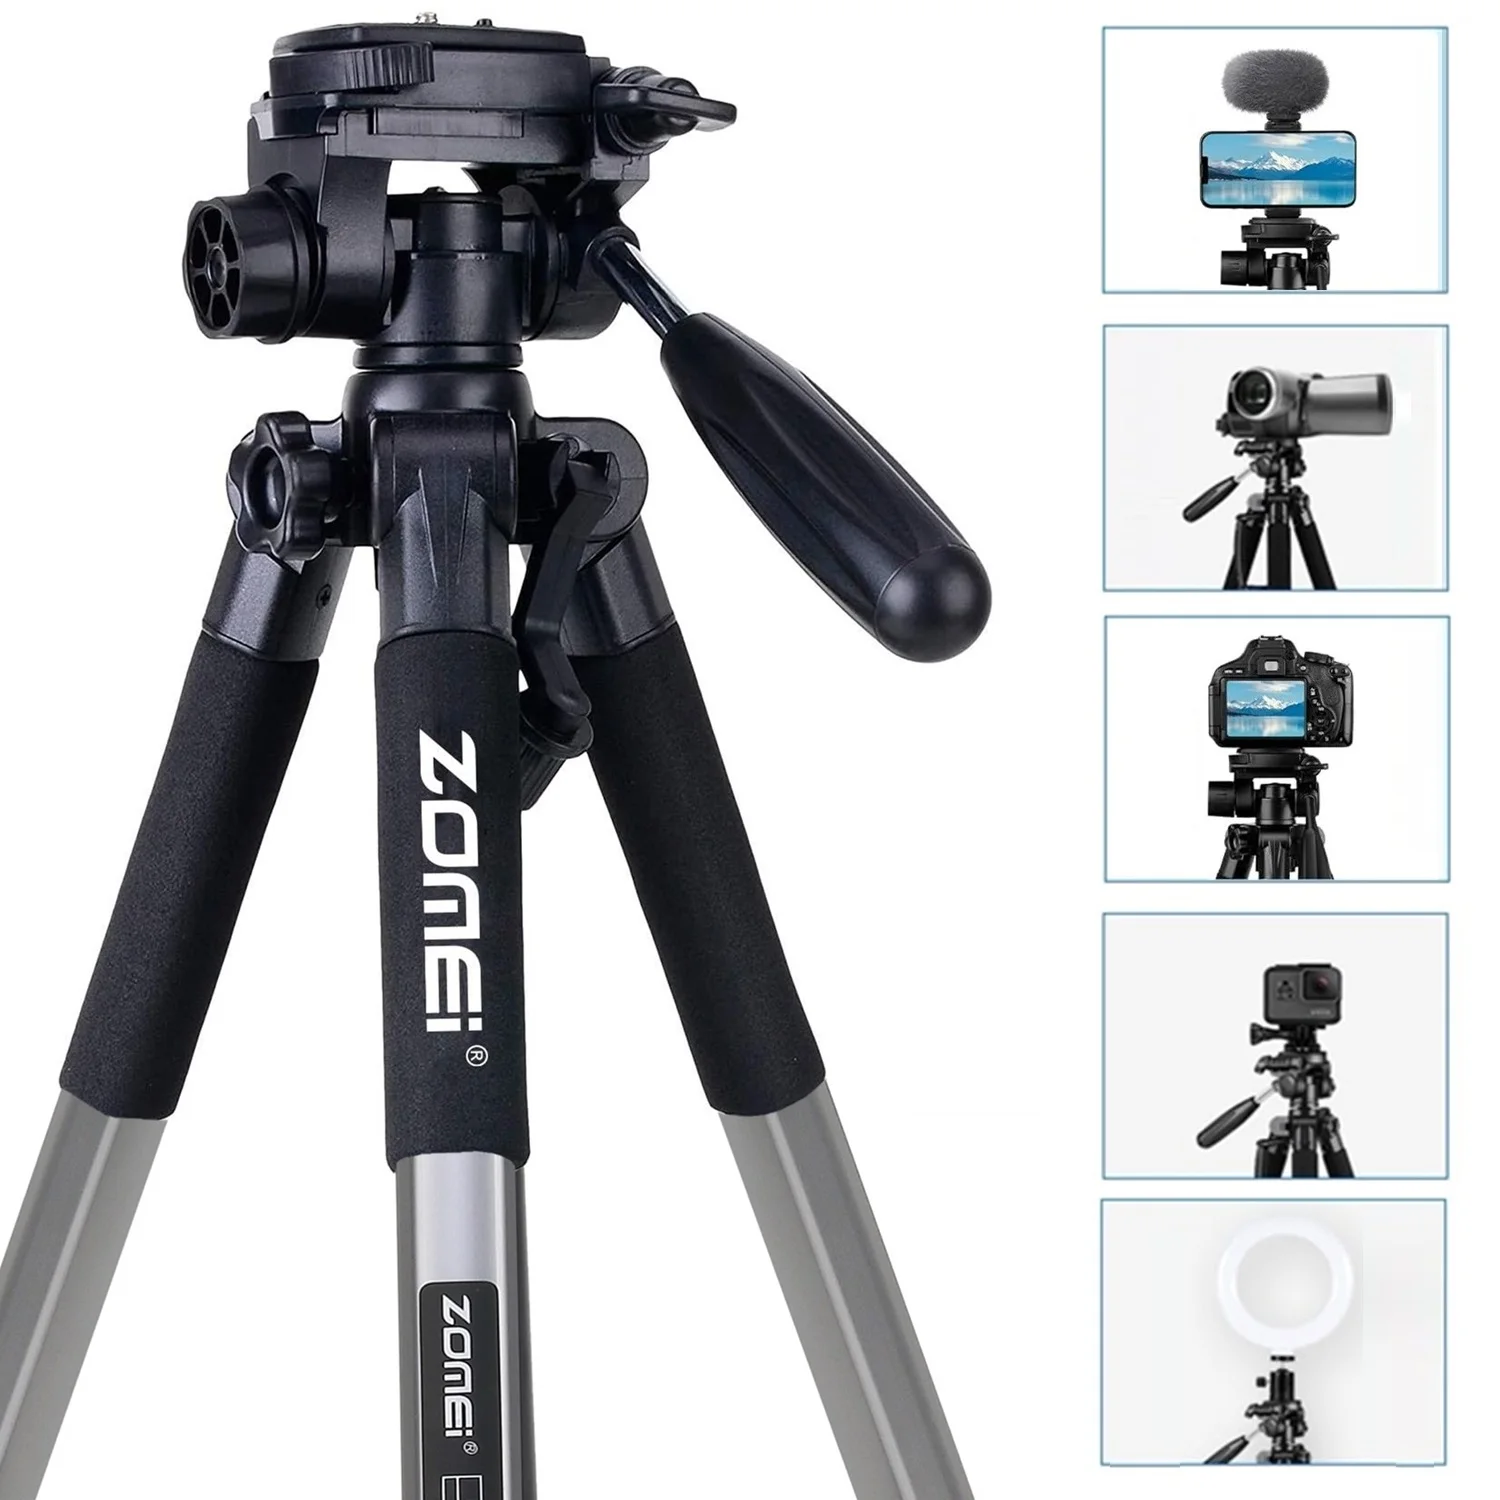 

Travel Outdoor Lightweight Phone Tripod 140cm/55.1in Adjustable-height Photography Stand for SLR Camera Canon Nikon Sony Video